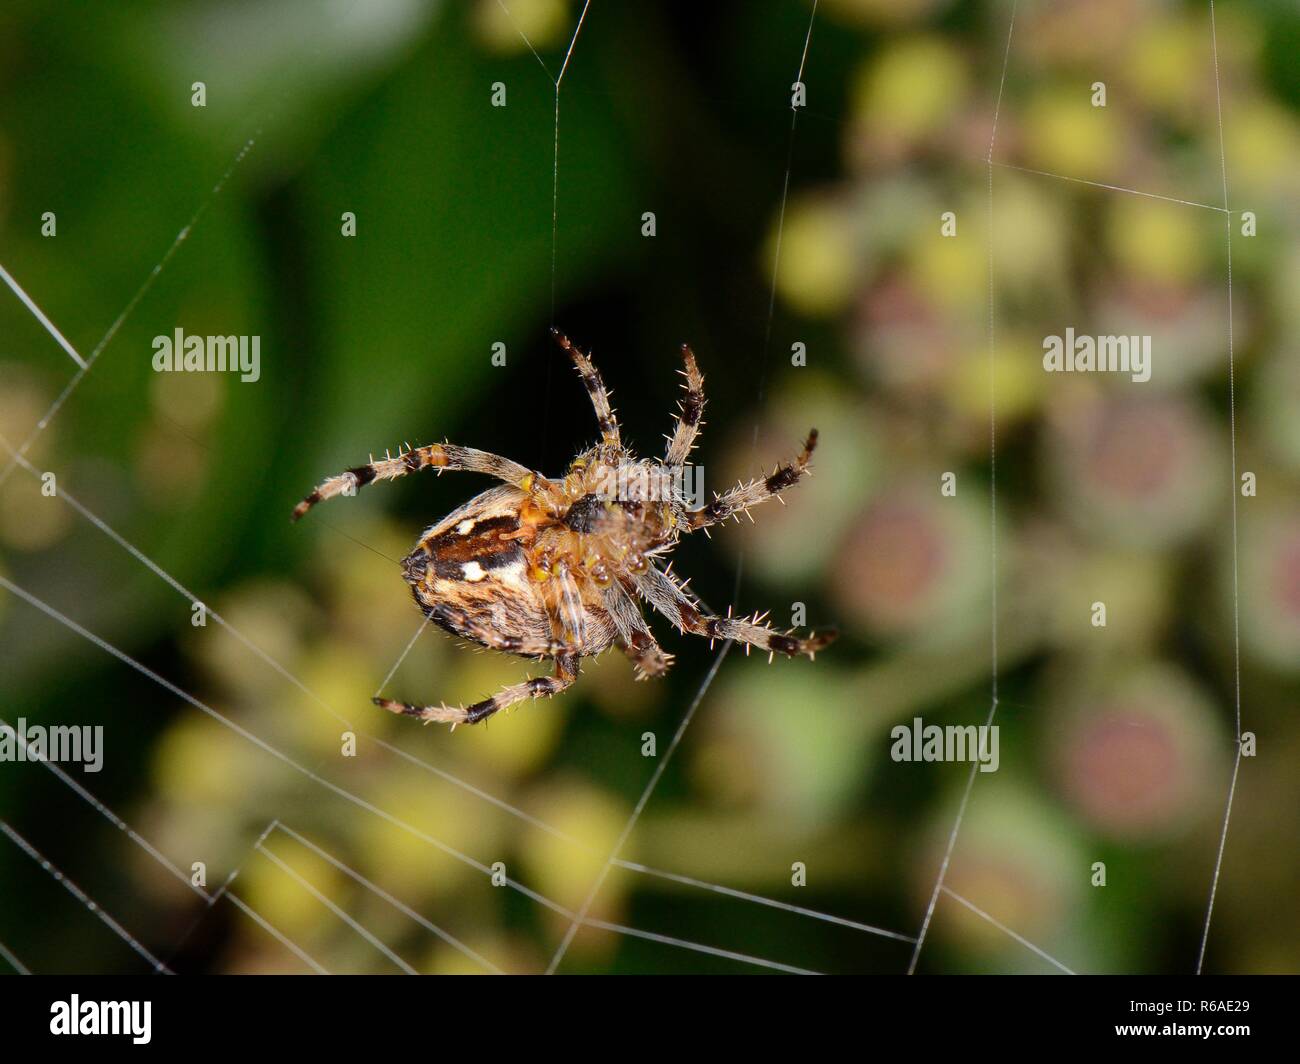 Female European garden spider / Cross orbweaver (Araneus diadematus) spinning its web on an ivy covered fence at night, Wiltshire, UK, September. Stock Photo